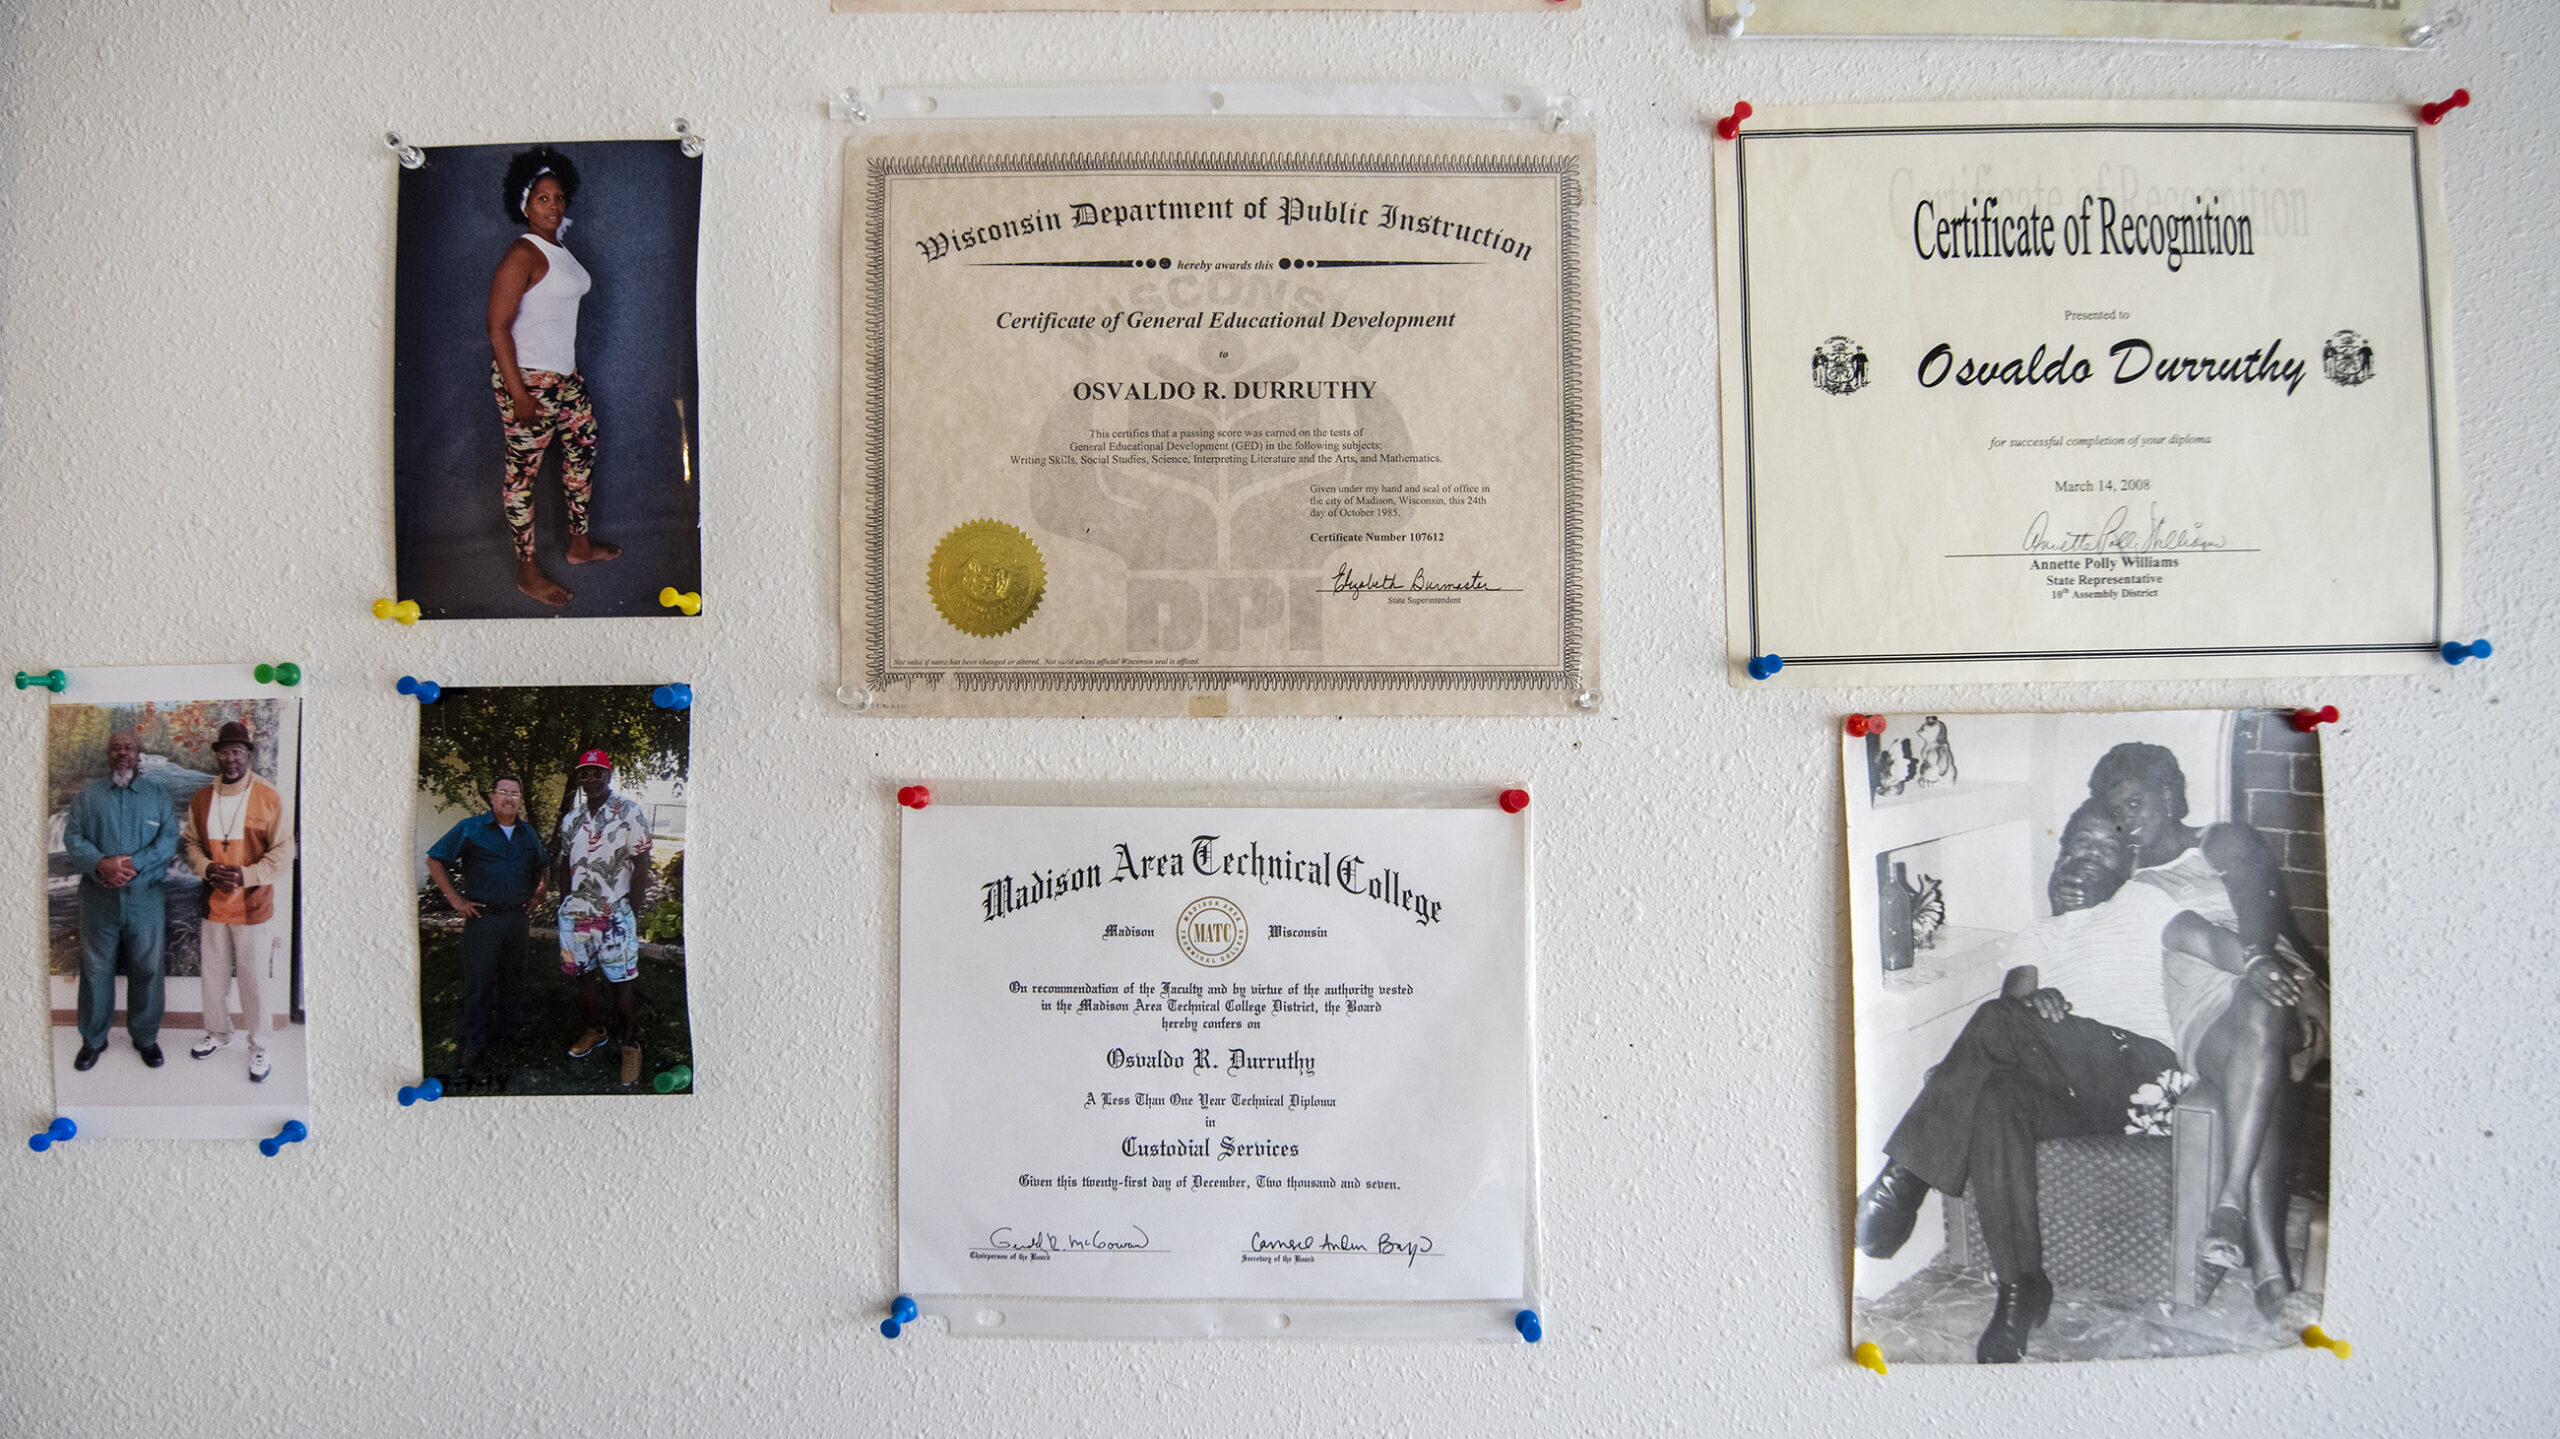 Osvaldo Durruthy's certificates and photos from Cuba on the wall